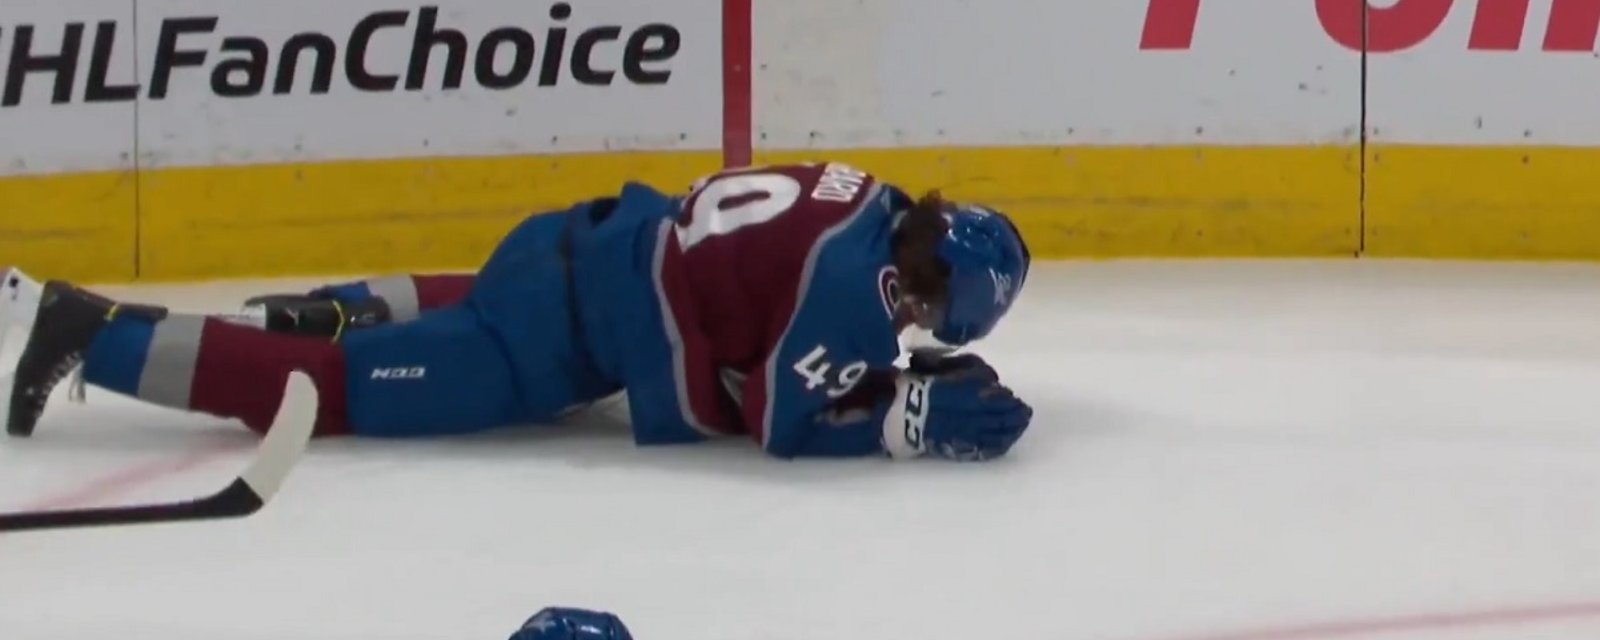 Max Pacioretty drops Samuel Girard with a reverse hit and all hell breaks loose.